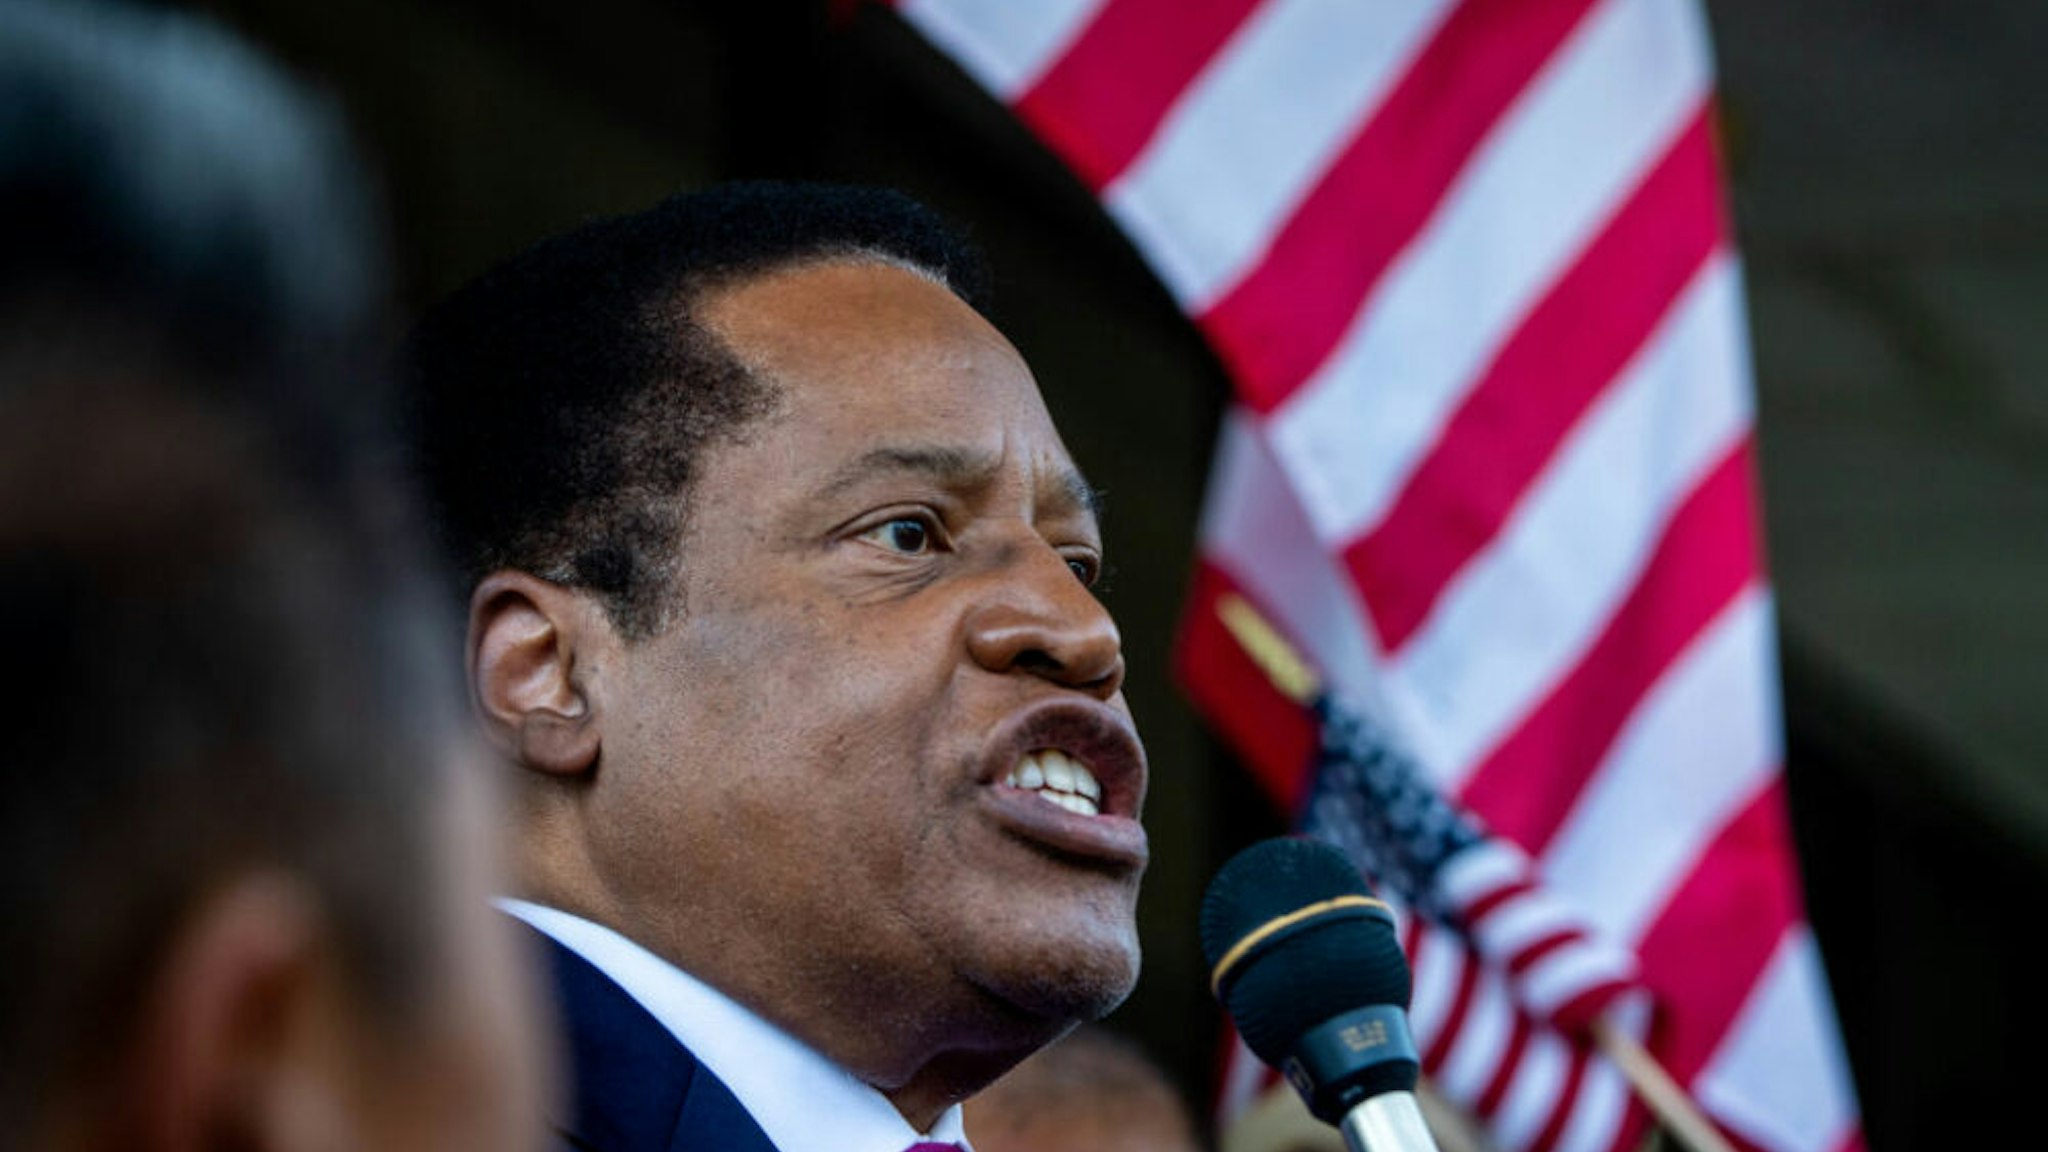 Norwalk, CA - July 13:Larry Elder speaks to supporters as he enters the race for California governor in the recall election at the Norwalk Registrar of Voters on Tuesday, July 13, 2021.